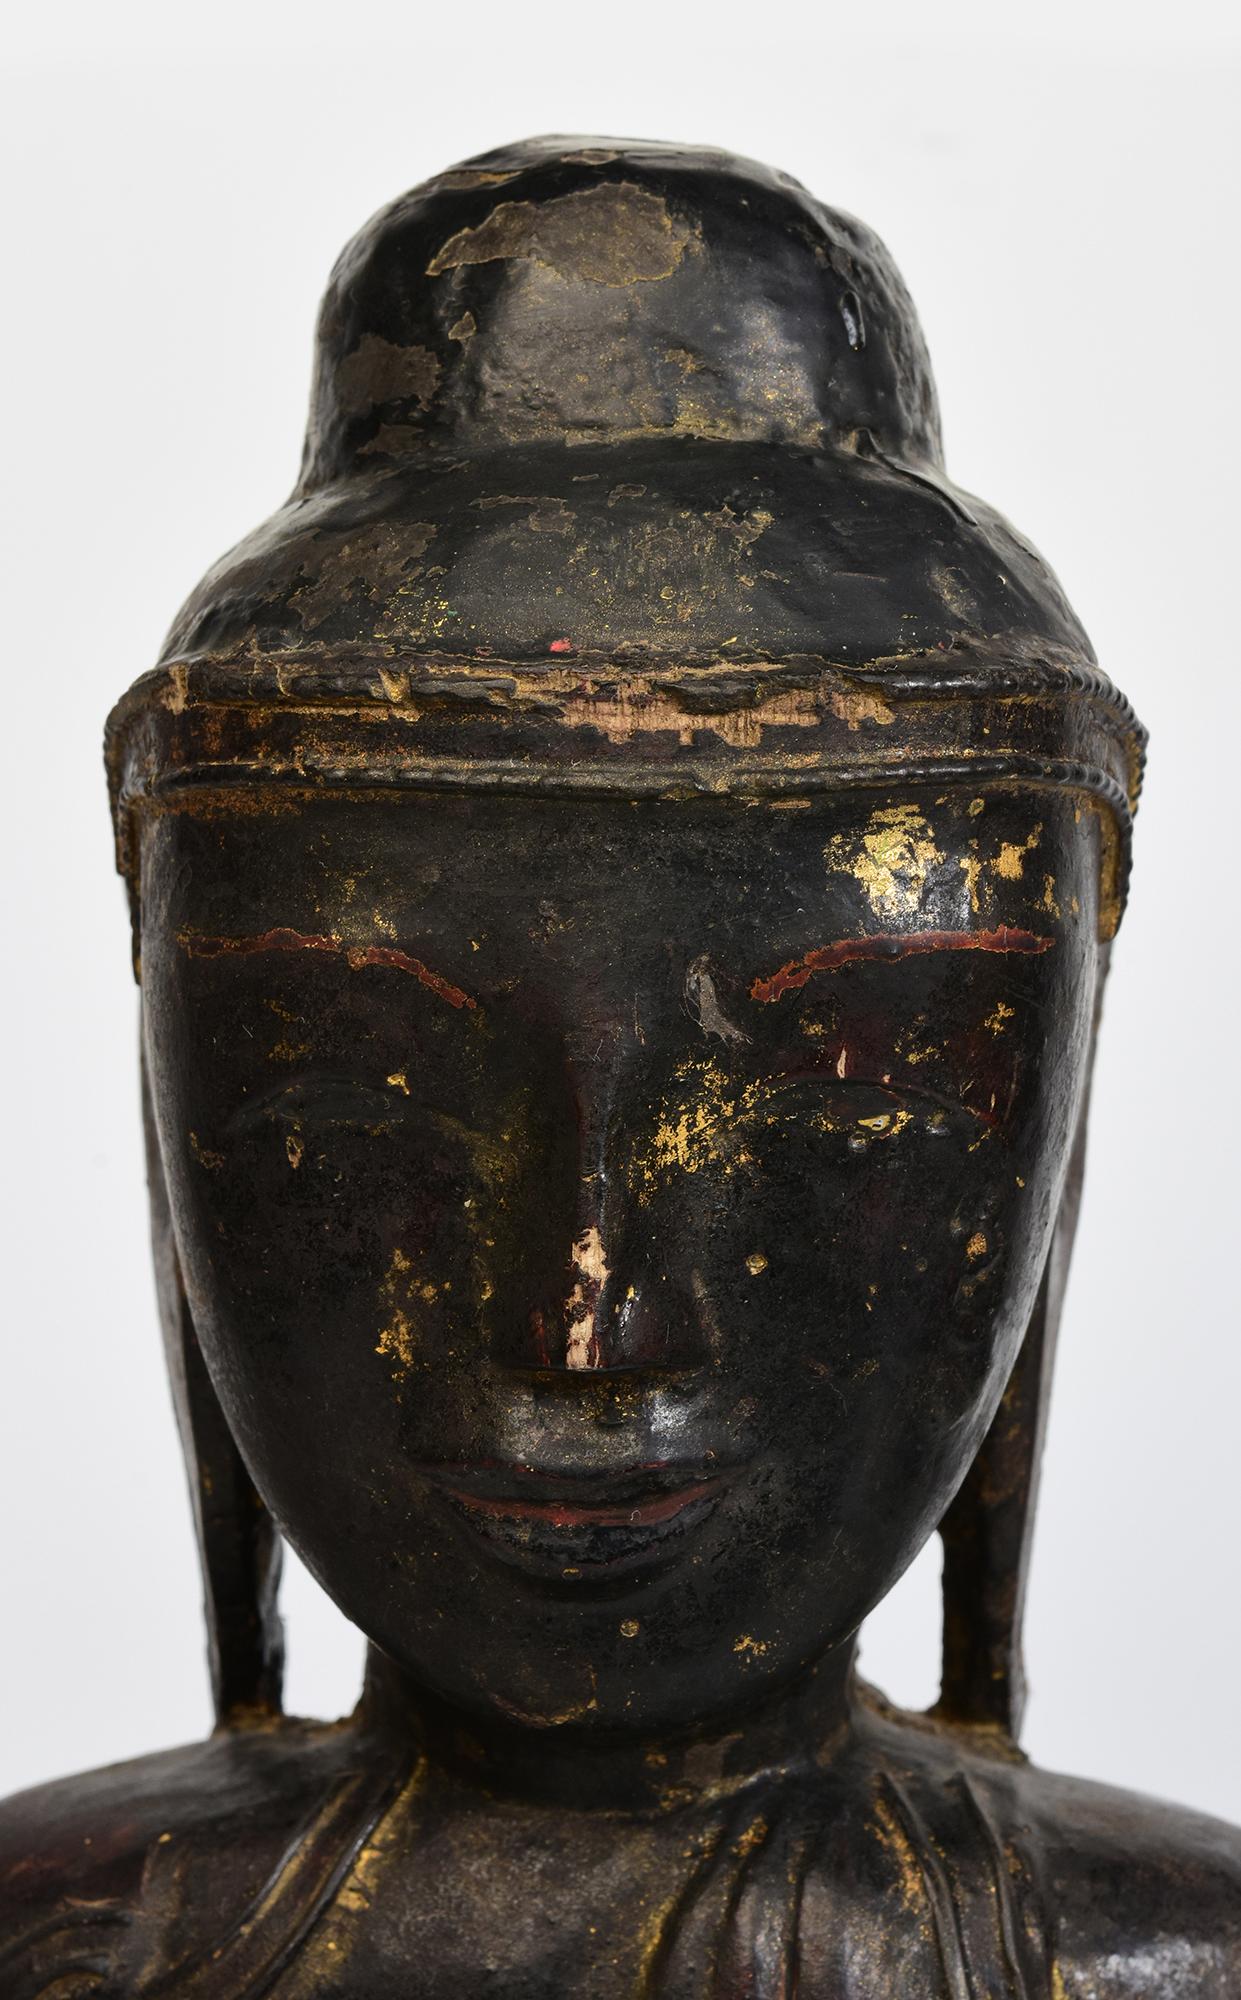 Burmese wooden Buddha sitting in Mara Vijaya (calling the earth to witness) posture on a base.

Age: Burma, Shan Period, 18th Century
Size: Height 50.6 C.M. / Width 31.2 C.M.
Condition: Nice condition overall (some expected degradation due to its